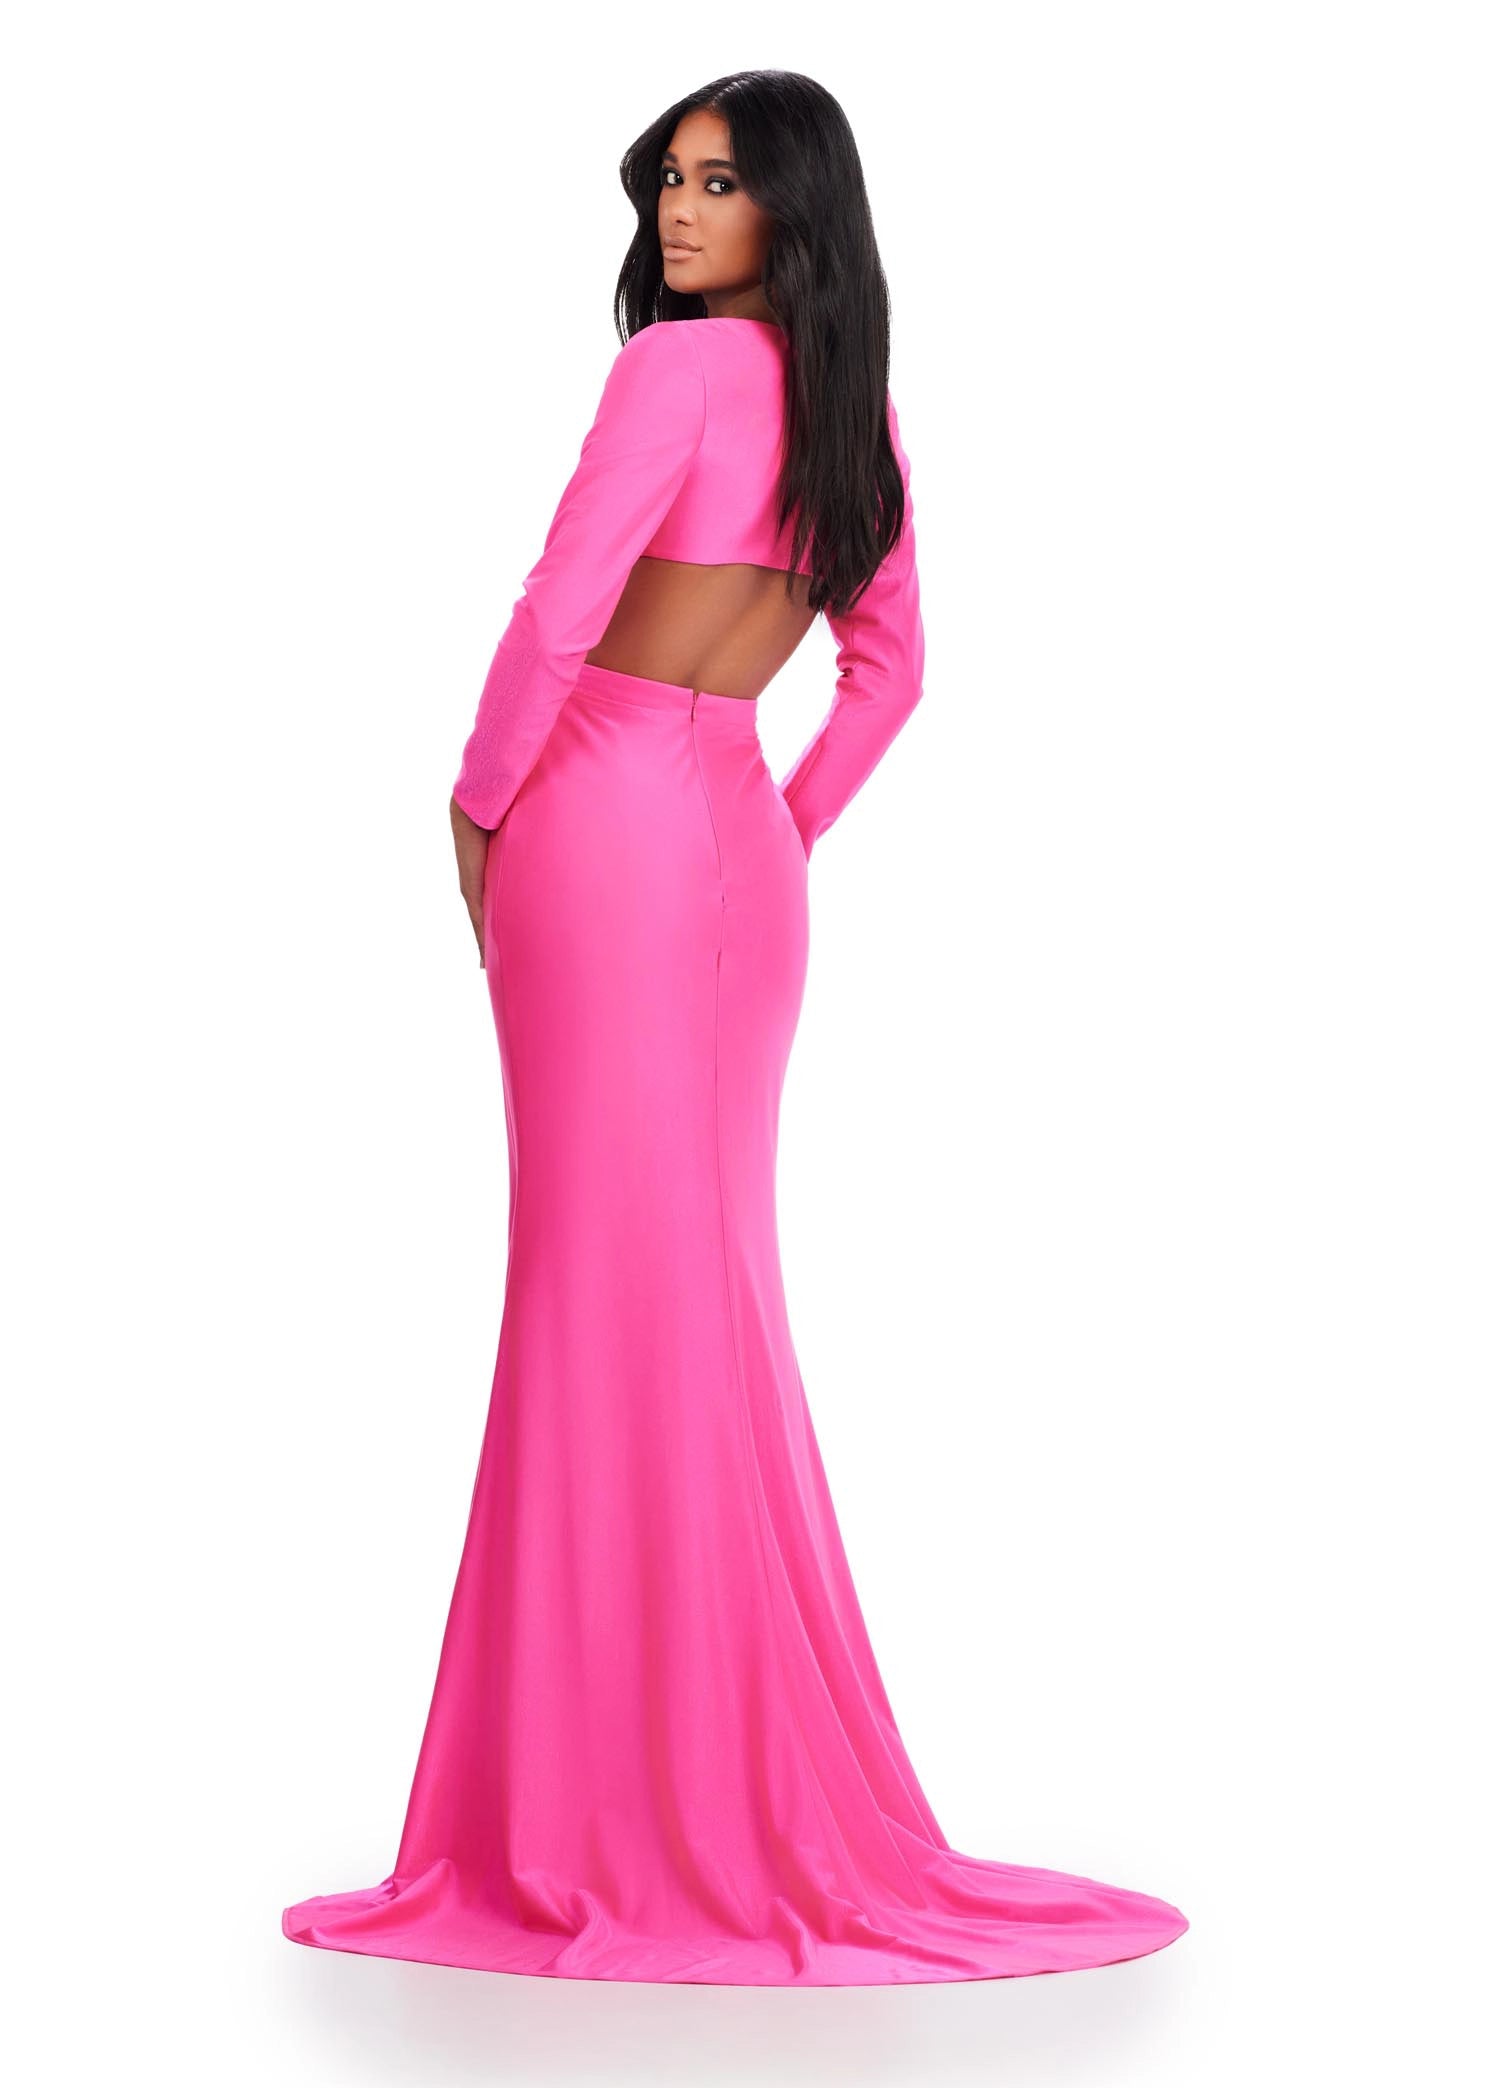 Look fabulous on prom night in the Ashley Lauren 11607 Jersey Cutout Dress. Cut from stretch jersey, this formal gown features a fitted skirt with a high side slit, long sleeves, and a scoop neckline with cutout detail. Make an unforgettable entrance in this figure-flattering style. Be unique in this v-neckline gown with crisscross cut out bodice. The look is accented with a fitted draped skirt and long sleeves.  COLORS: Yellow, Turquoise, Hot Pink, Coral